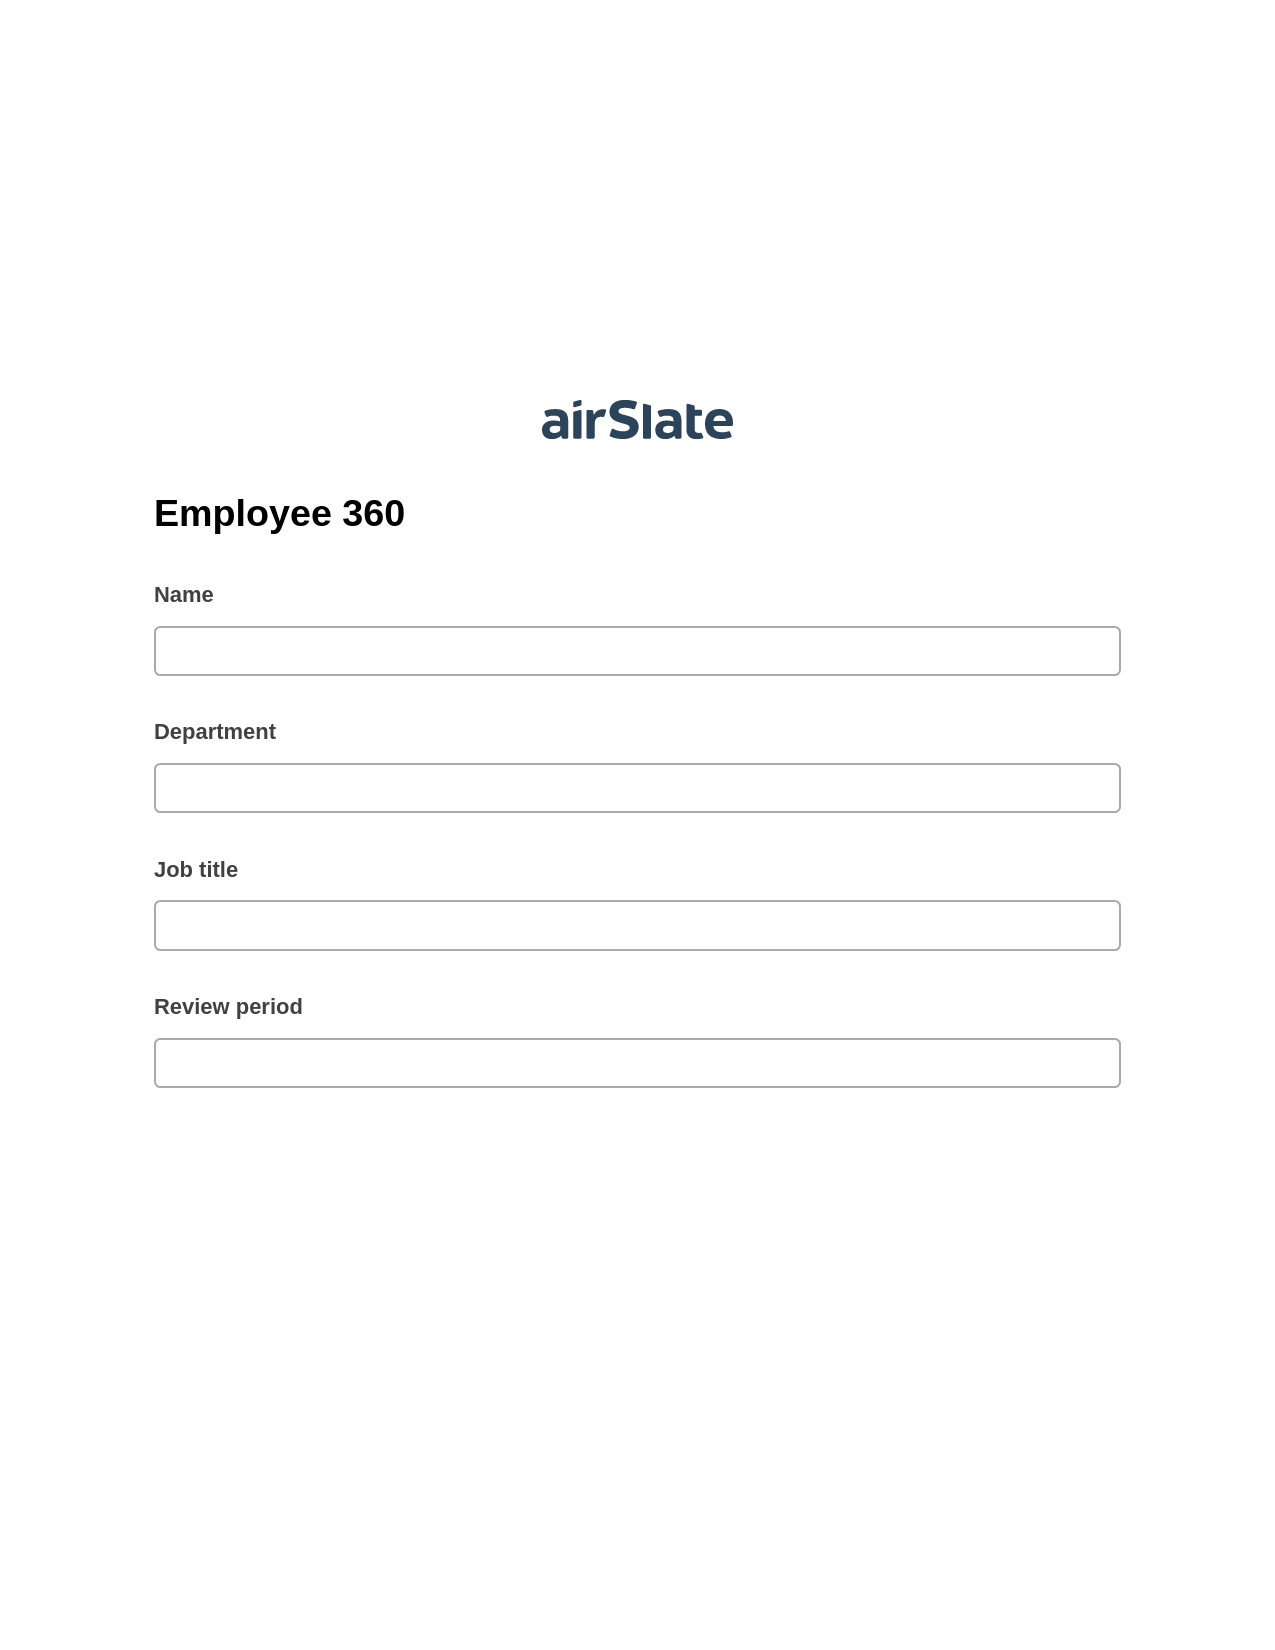 Multirole Employee 360 Pre-fill from Salesforce Records with SOQL Bot, Email Notification Bot, Archive to SharePoint Folder Bot